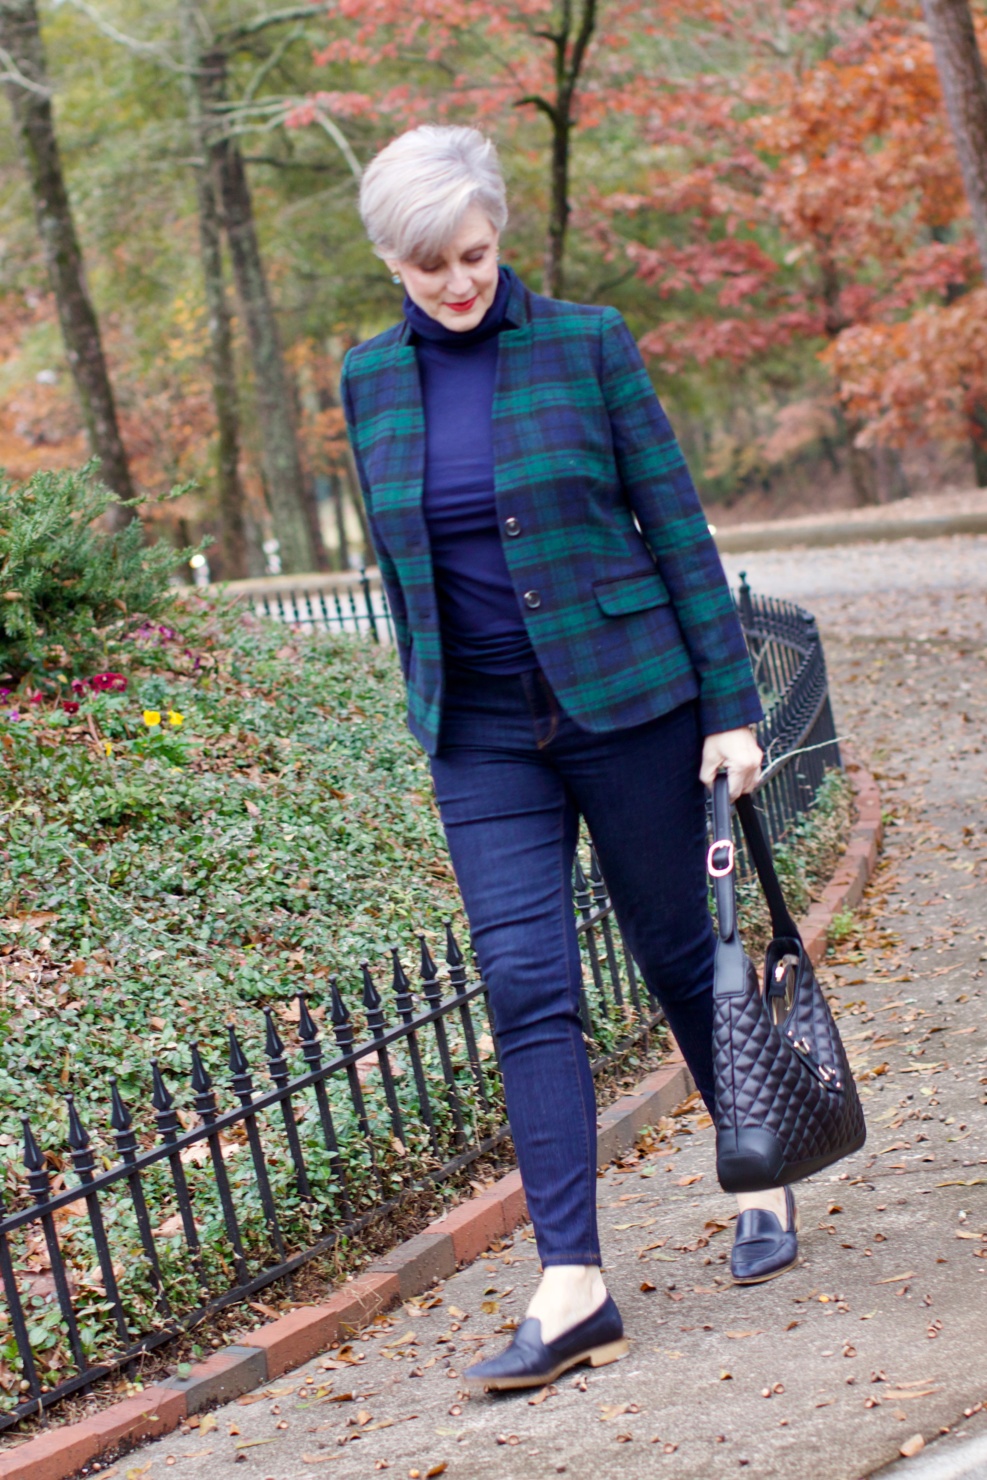 beth from Style at a Certain Age wears a black watch plaid blazer, tissue turtleneck, dark rinse denim, and navy blue loafers